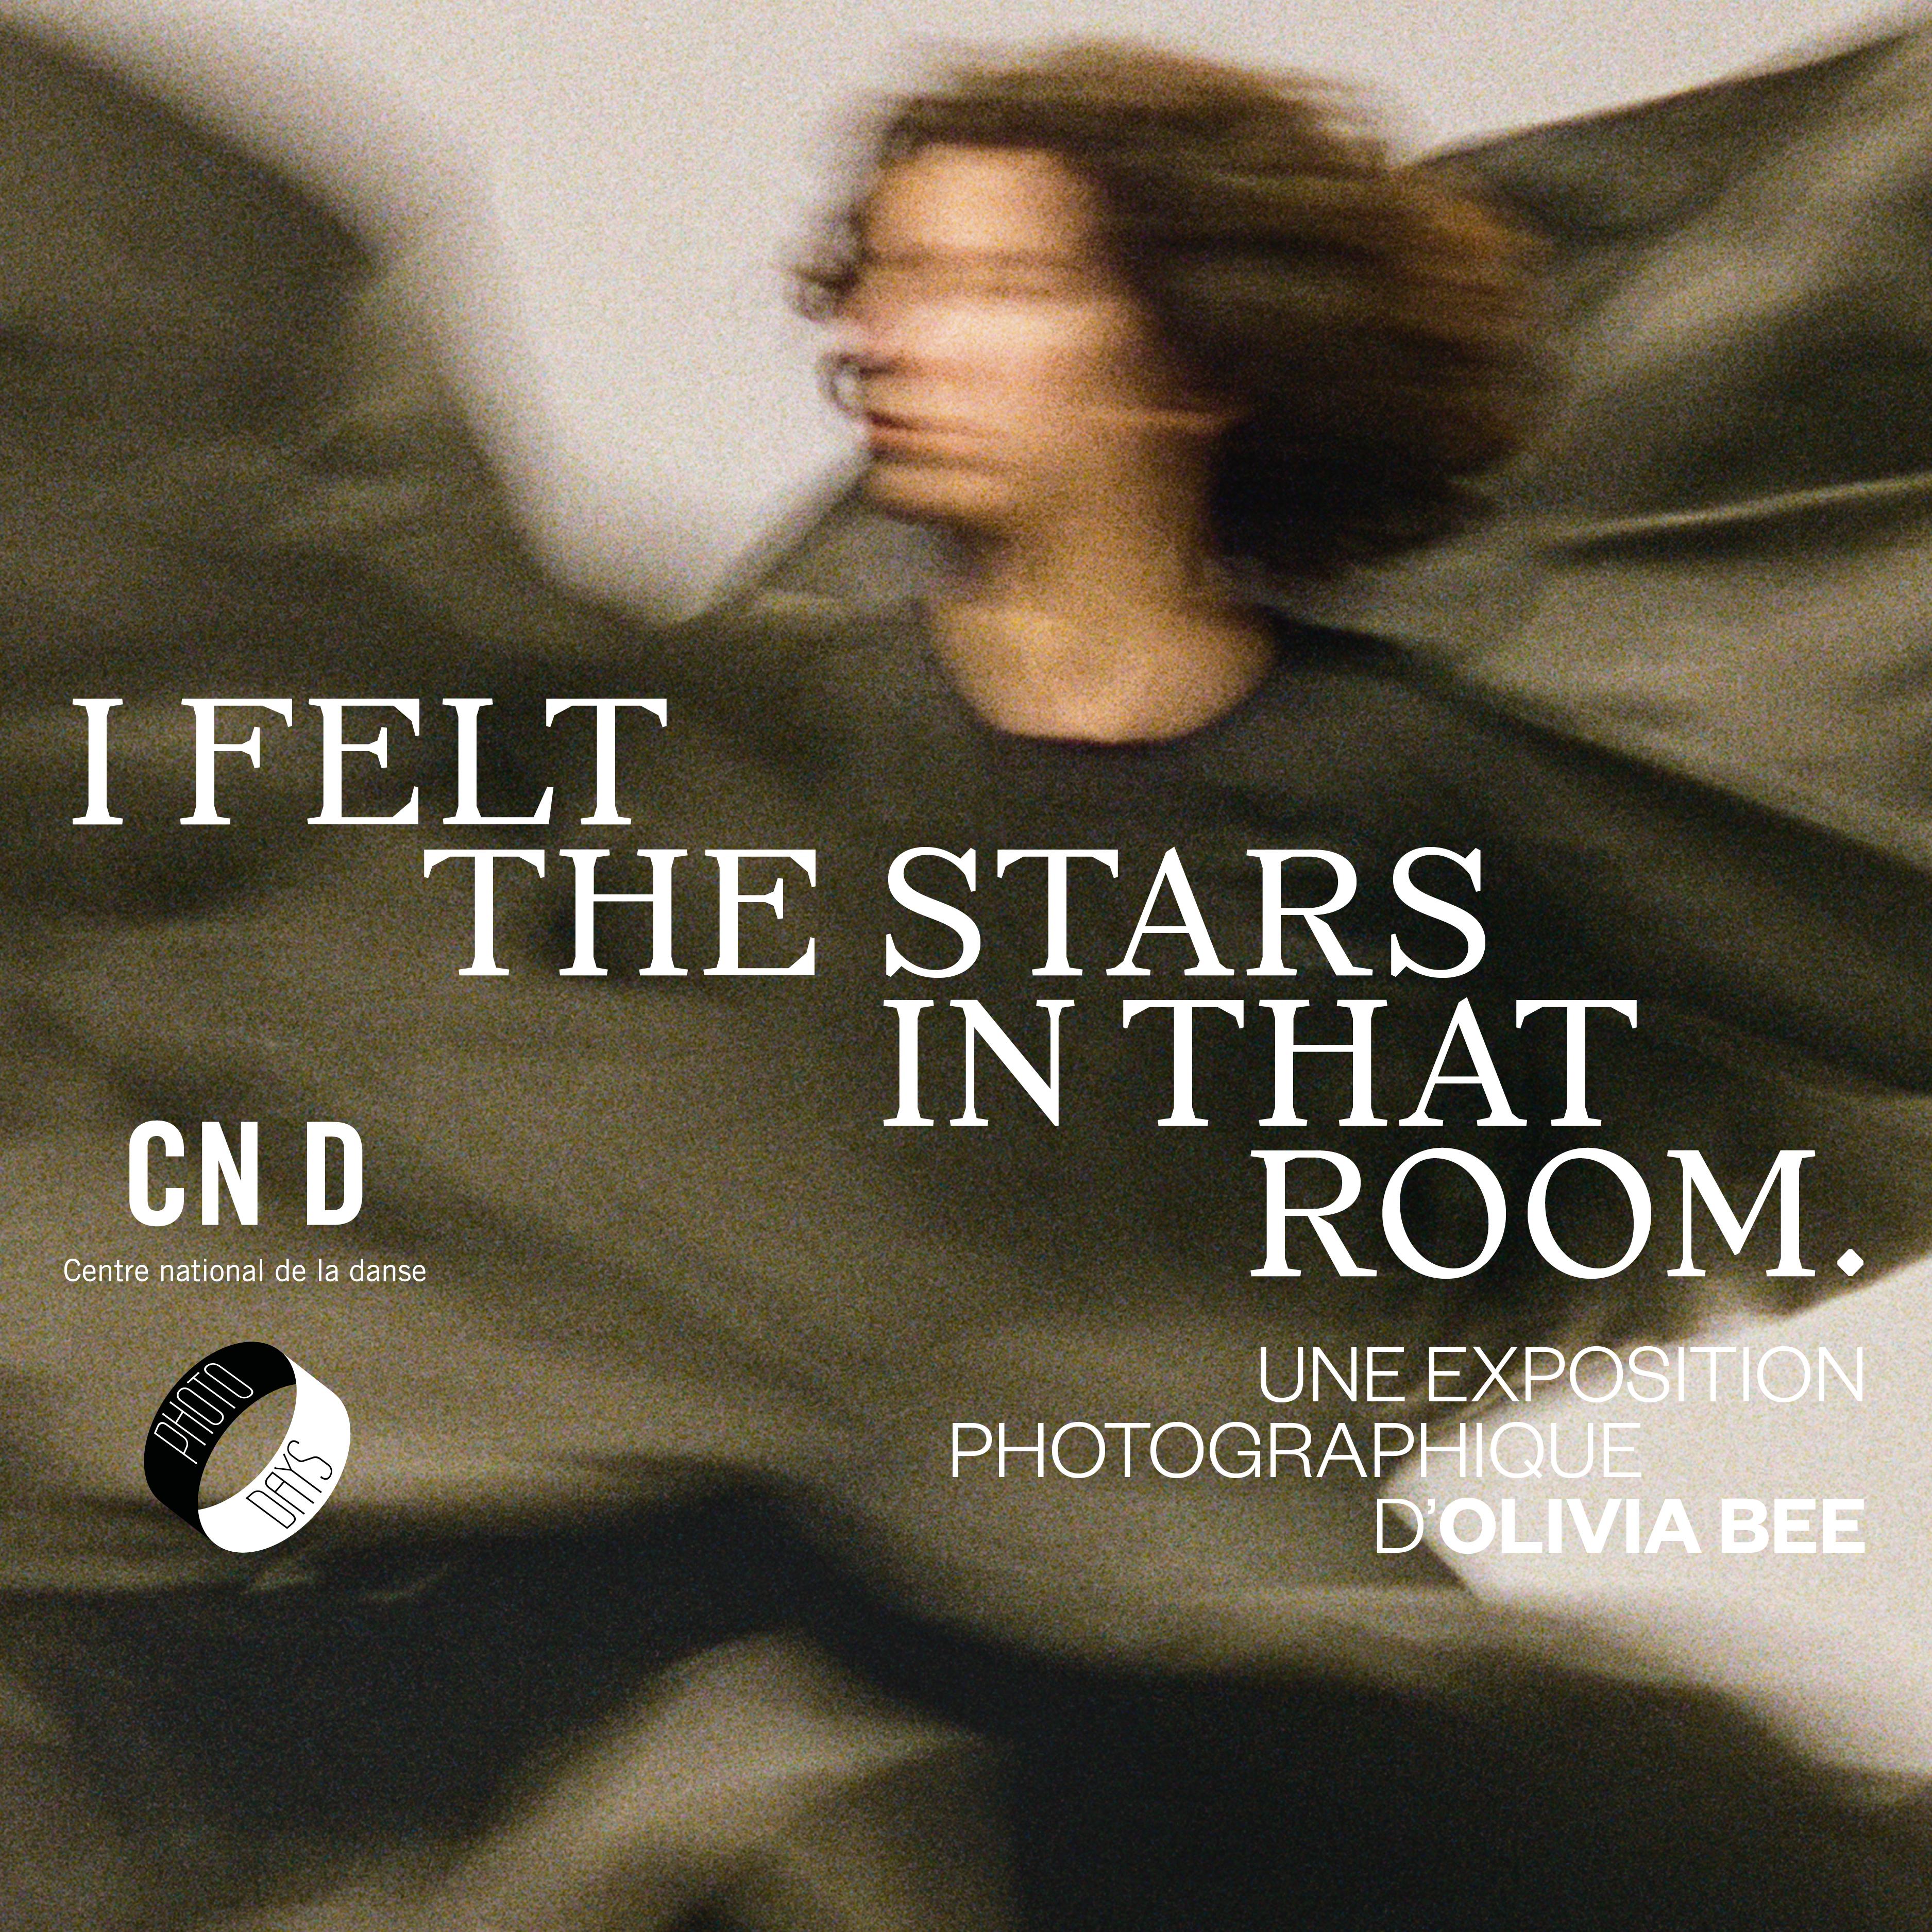 Poster of the exhibition "I felt the stars in that room" by Olivia Bee